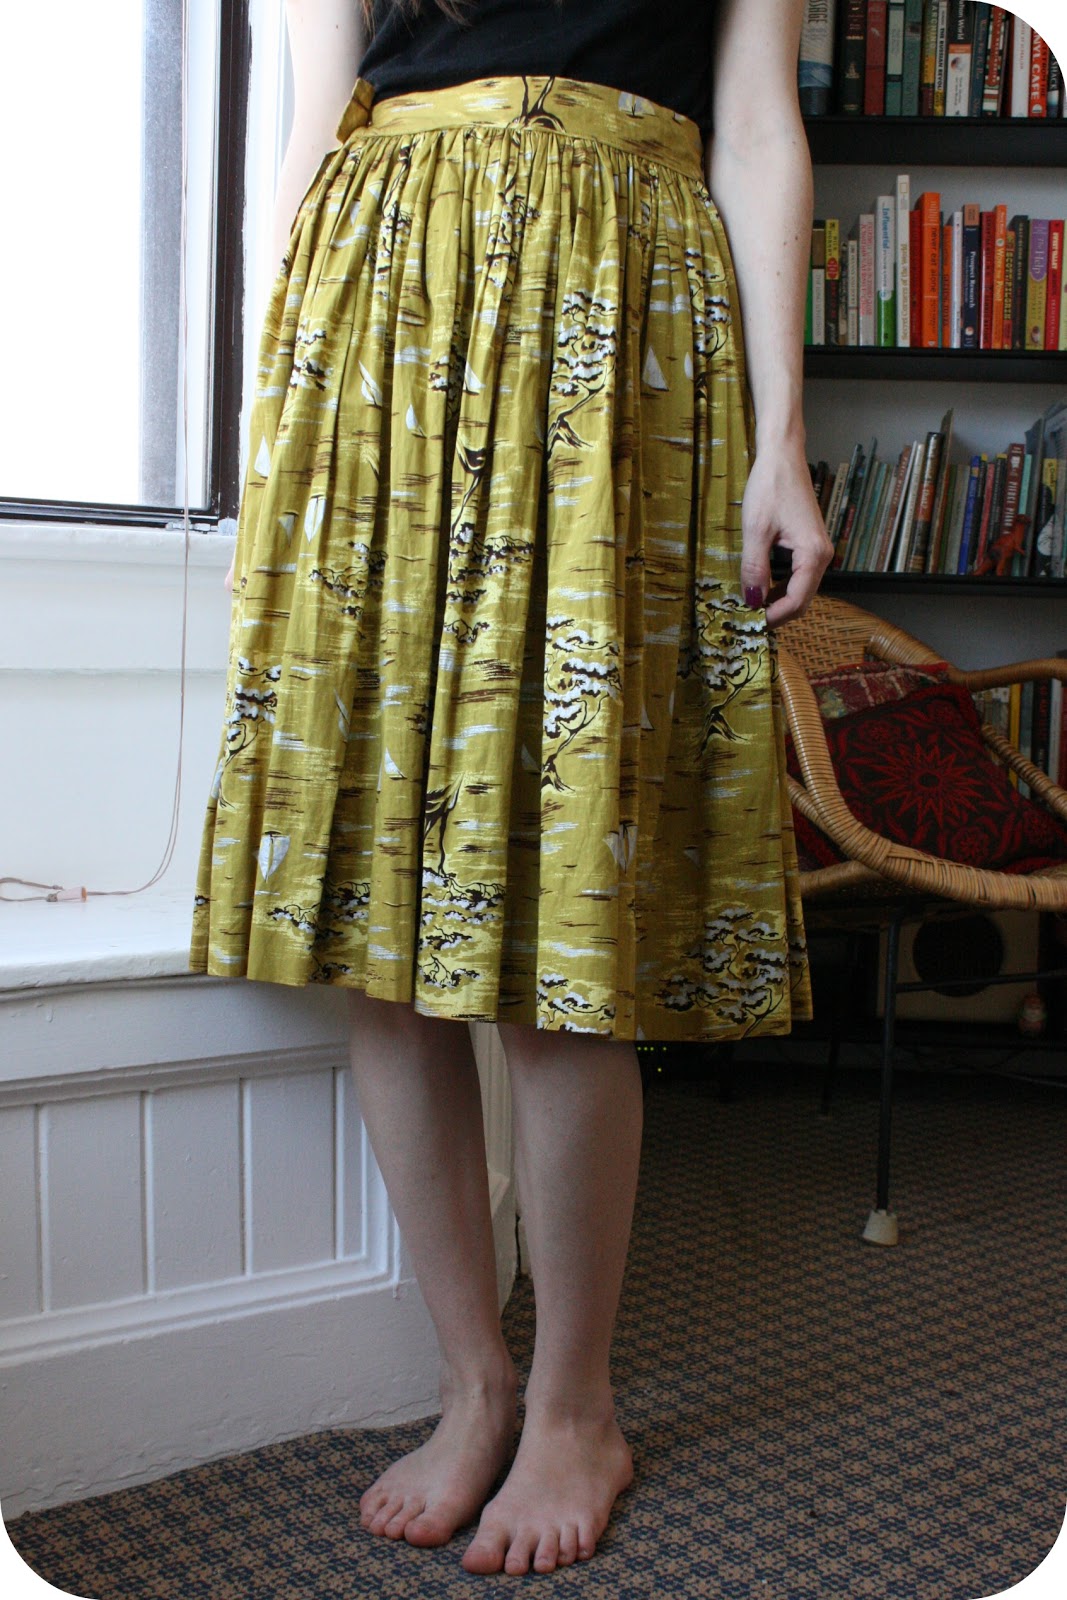 deliciously yours: you don't need a sewing machine to hem a skirt